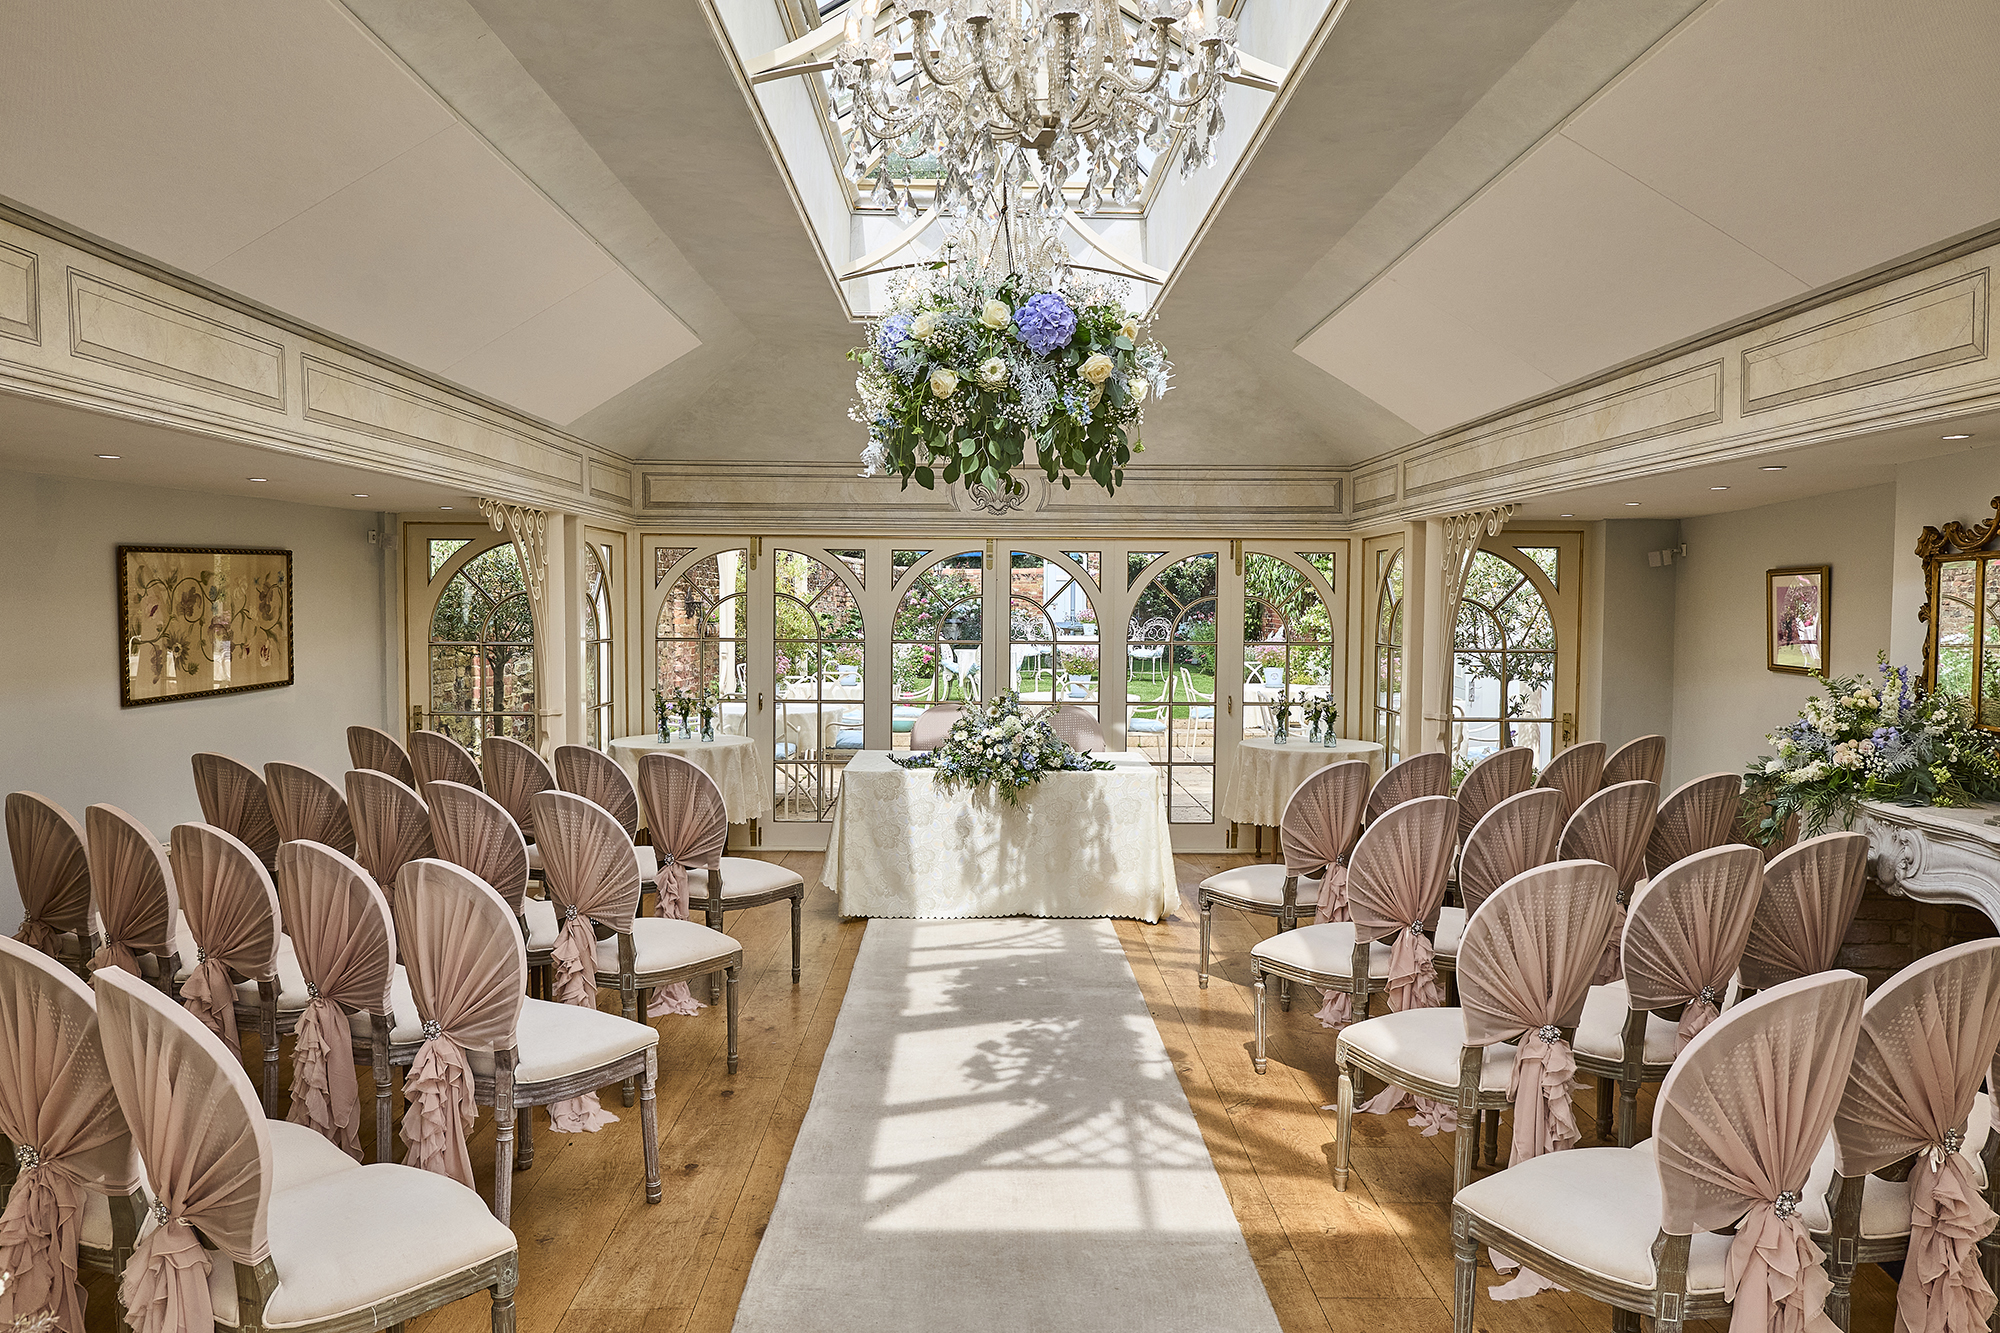 The orangery at the Woburn Coffee House